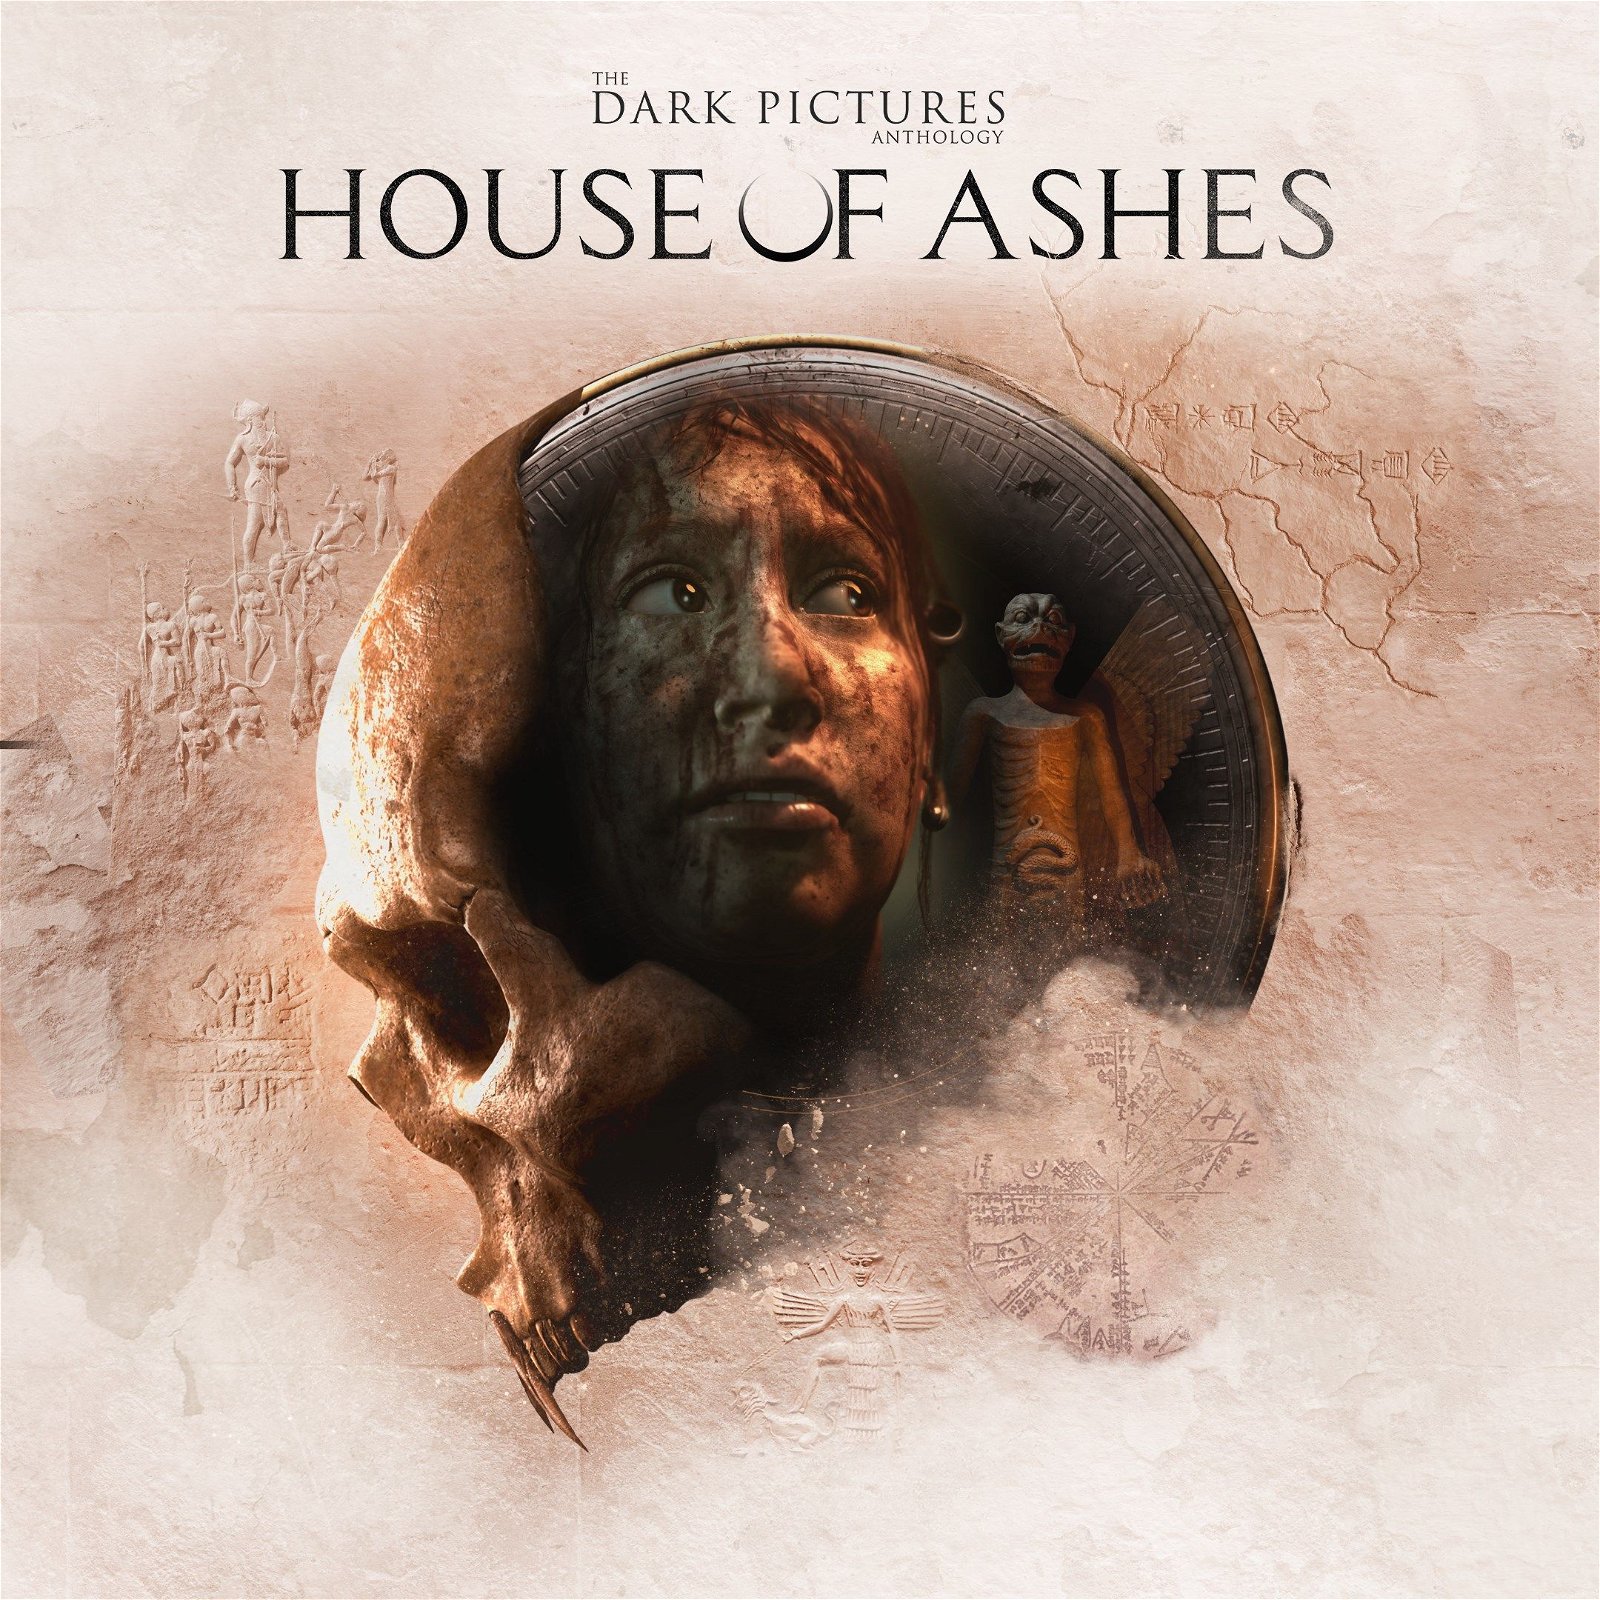 Image of The Dark Pictures Anthology: House of Ashes